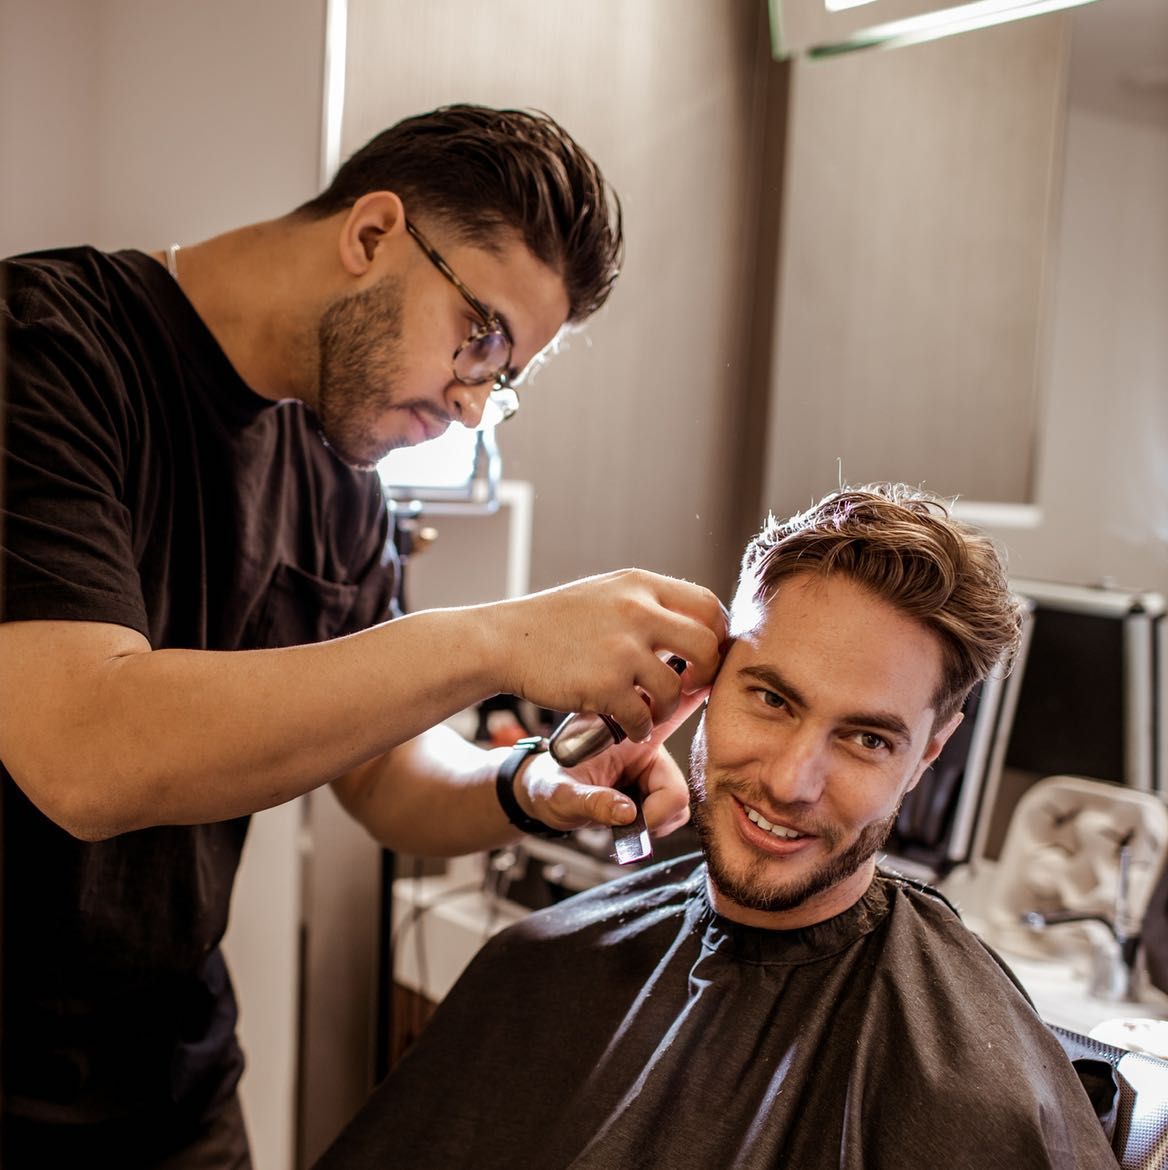 Nearest Haircut Places in Boca Raton | Book a Haircut Appointment Near You!